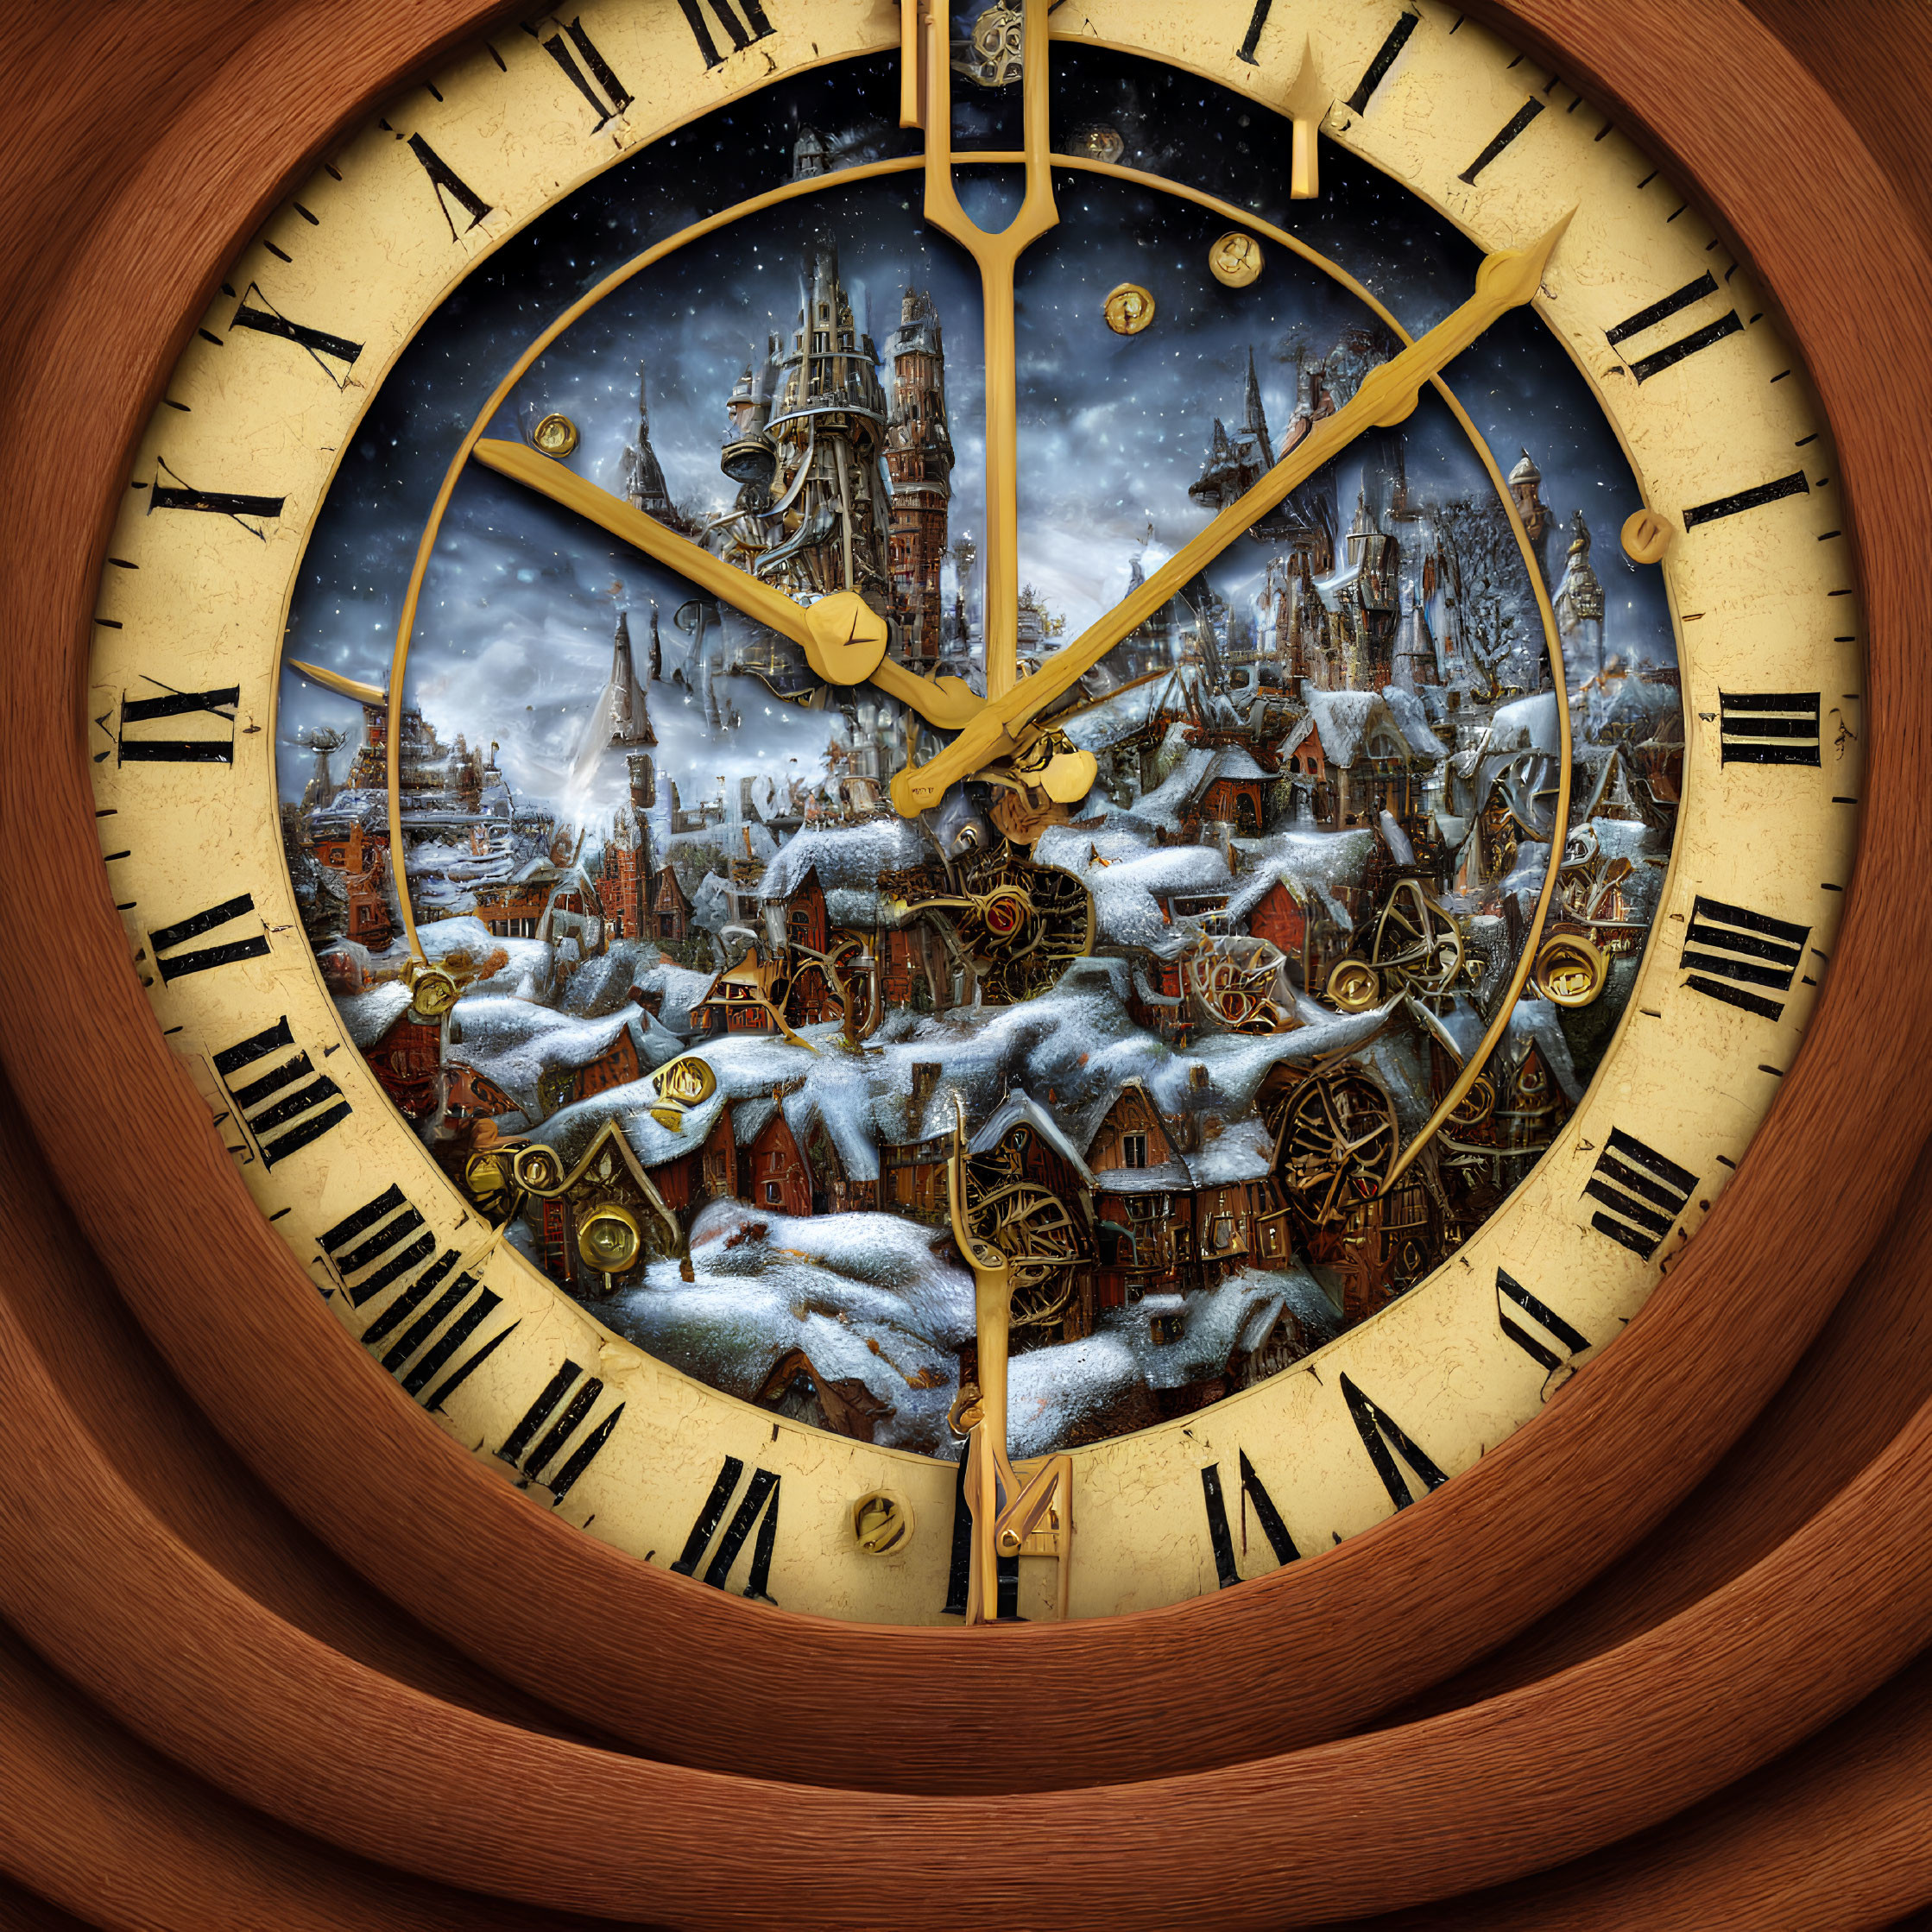 Snowy Medieval Town Scene Clock Face with Castle and Gold Hands